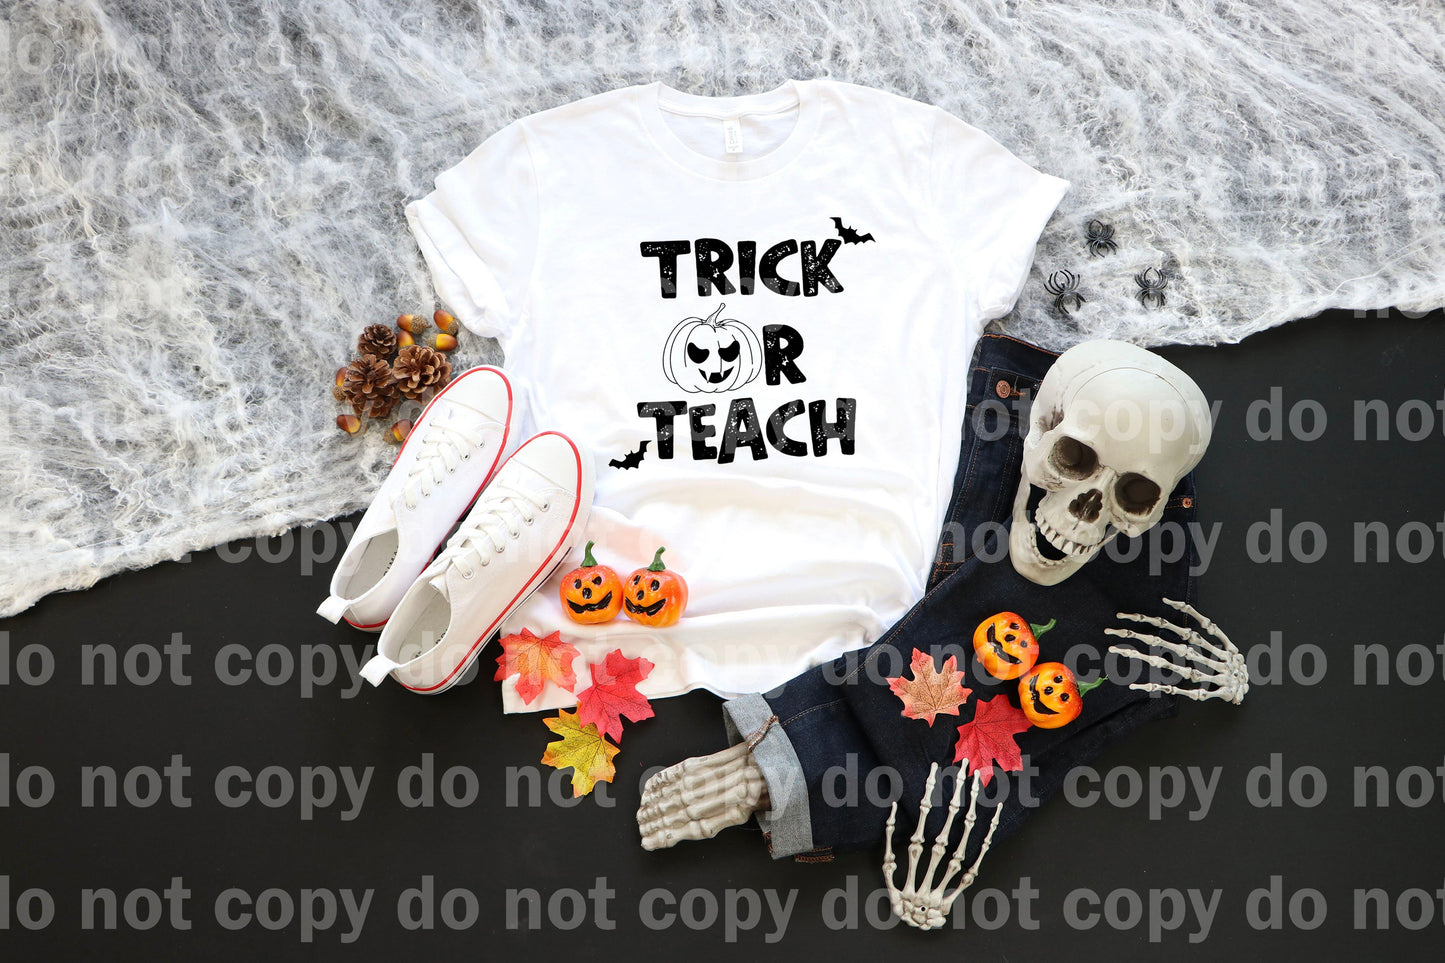 Trick or Teach Full Color/One Color Dream Print or Sublimation Print